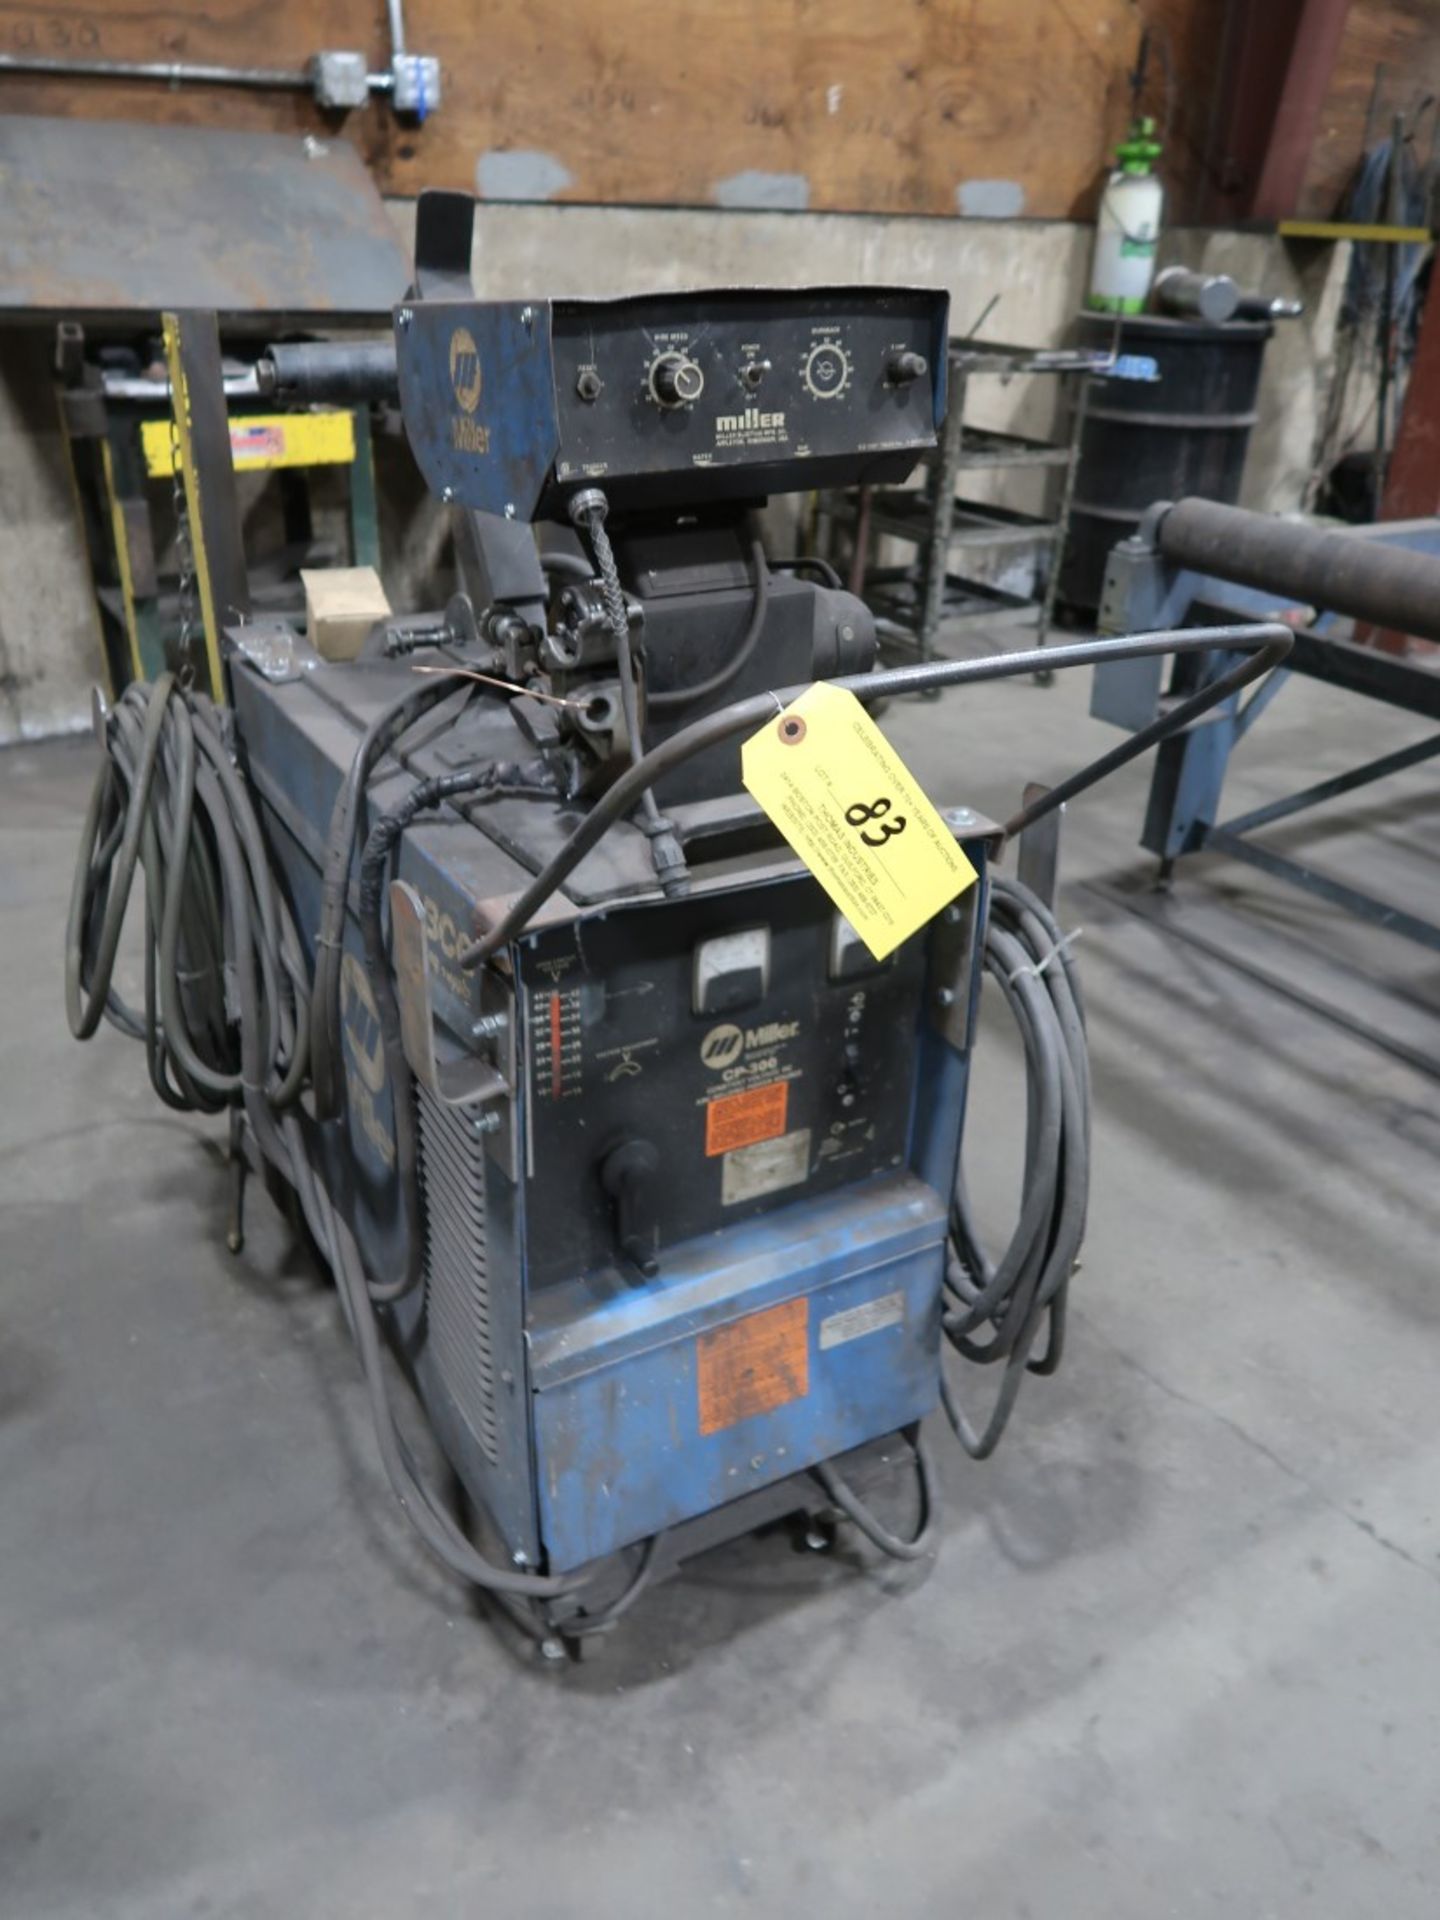 Miller CP-300 DC Arc Welder S/N JH179060 200/230/460 Volts, 38/33/16S Amp w/ Miller Wire Feed - Image 2 of 4